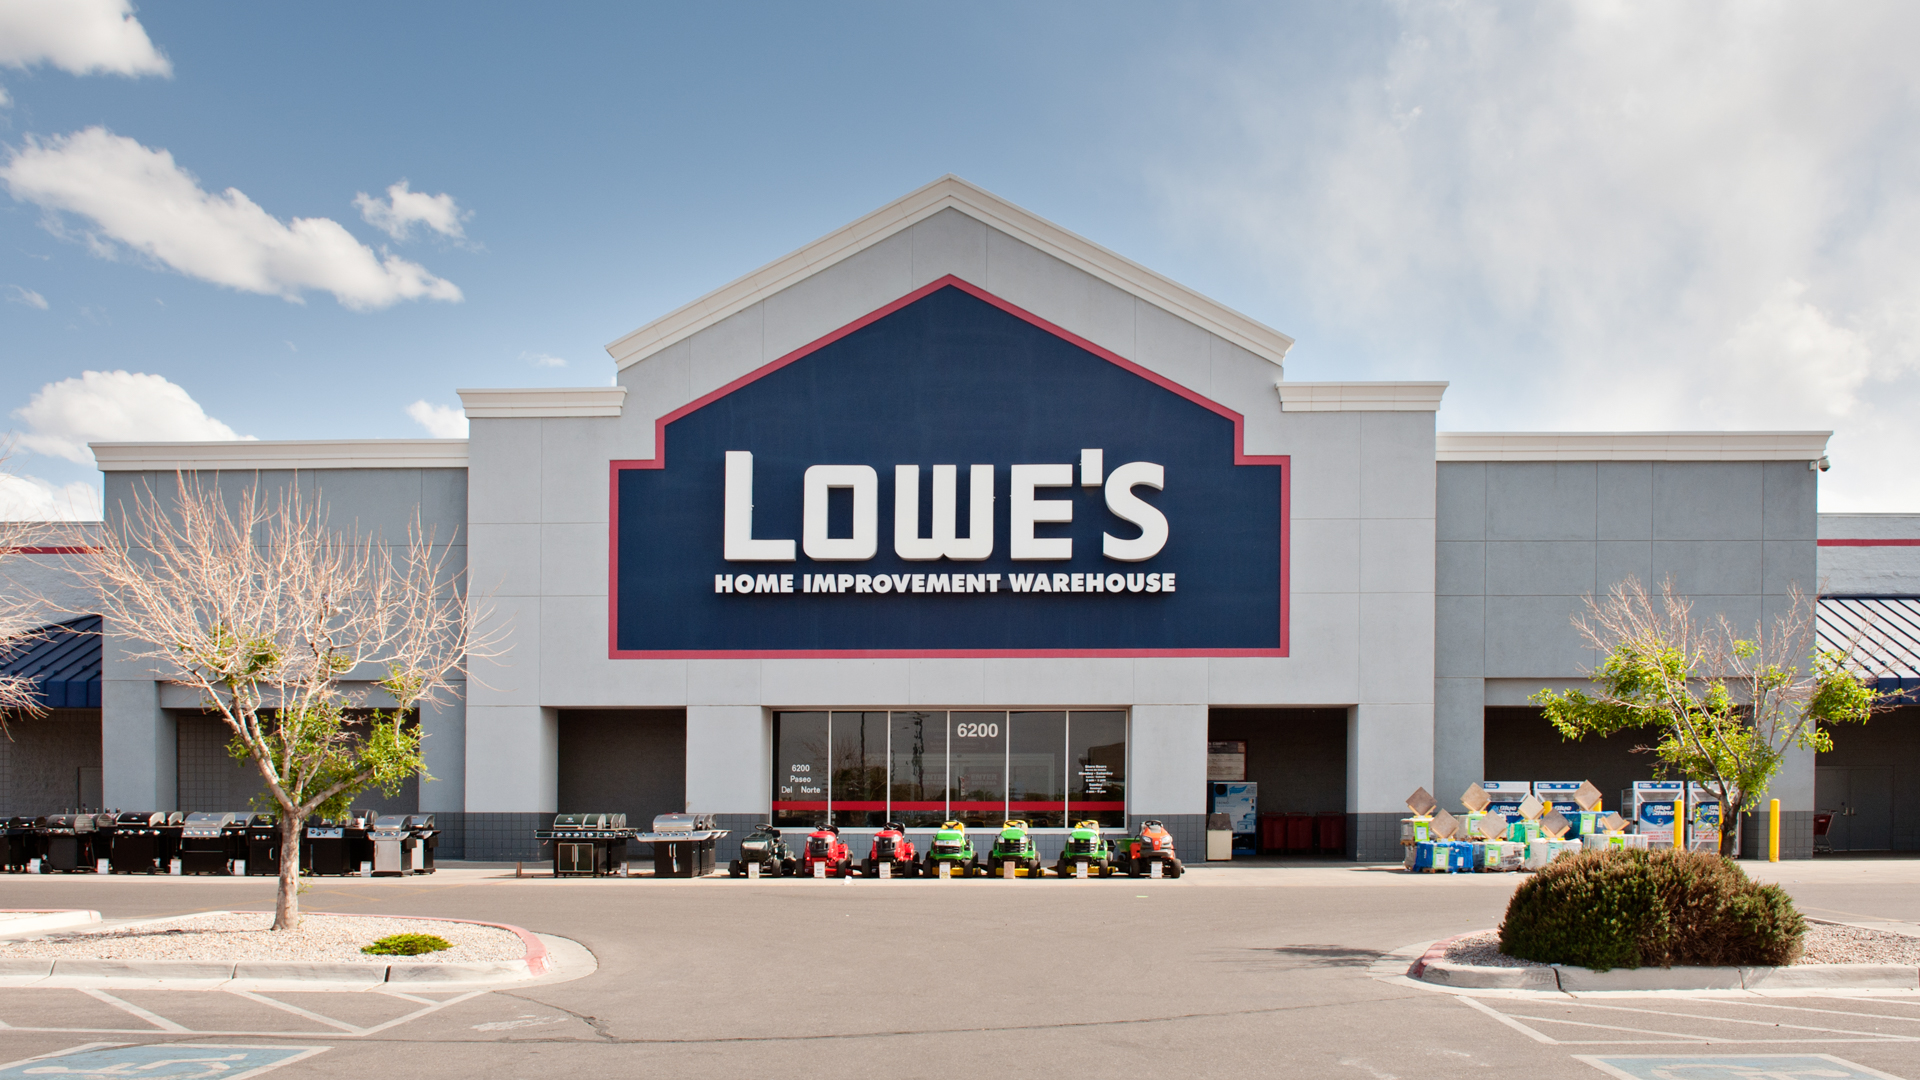 One reason Lowes and Home Depot had rocky Q1 earnings: Check the